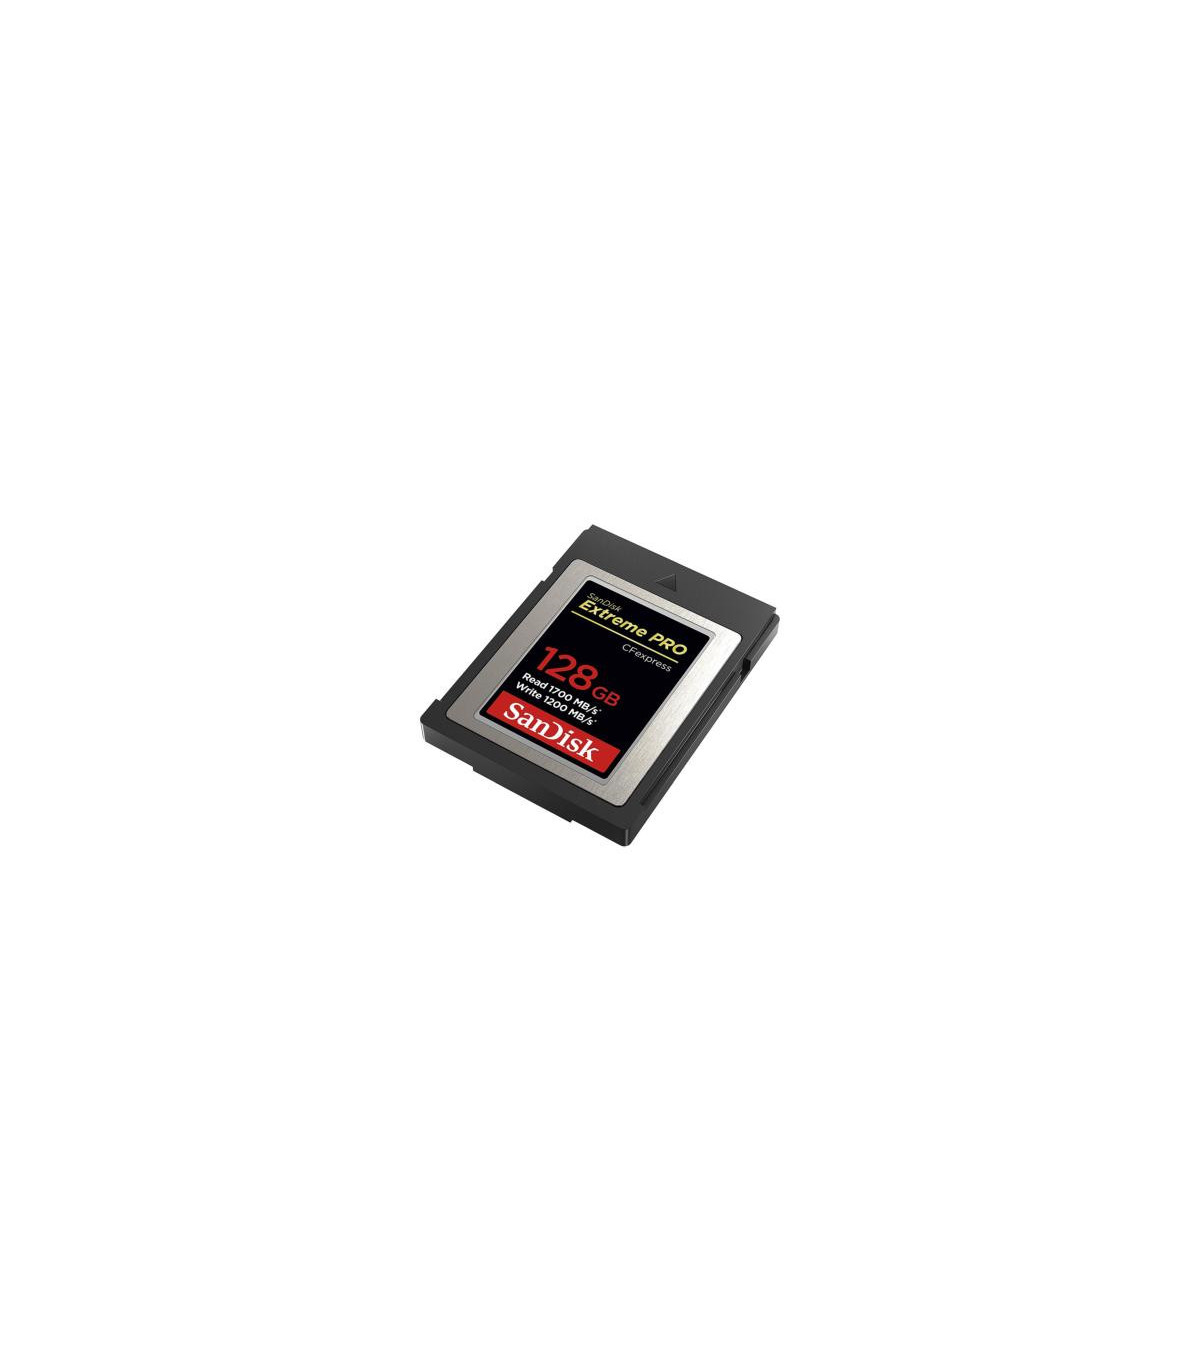 Sandisk Extreme Pro 256 Go, carte CFast 2.0 rapide 525 Mo/s